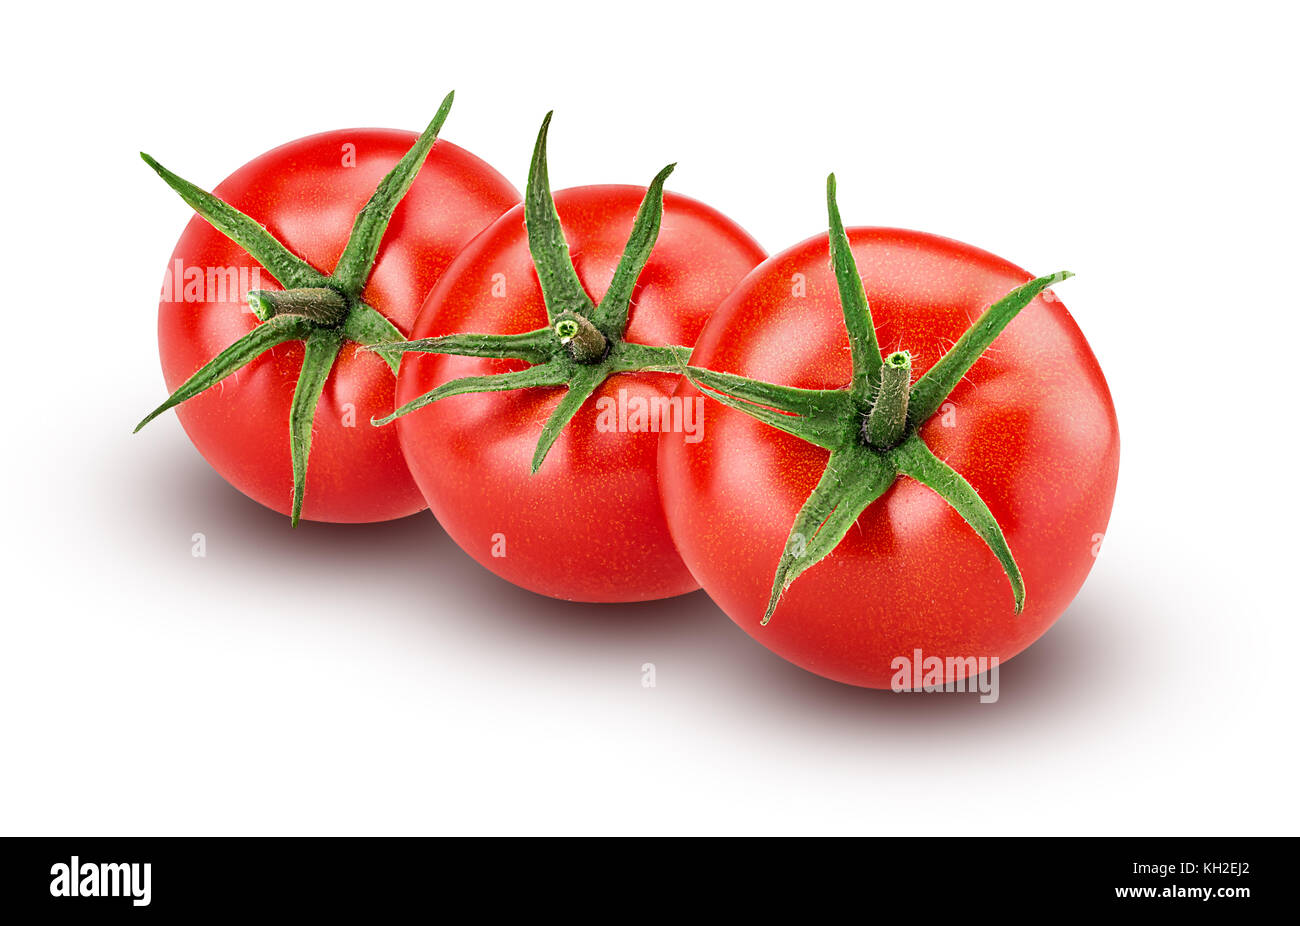 Three fresh red tomato with green leaves isolated on white background Clipping Path Stock Photo